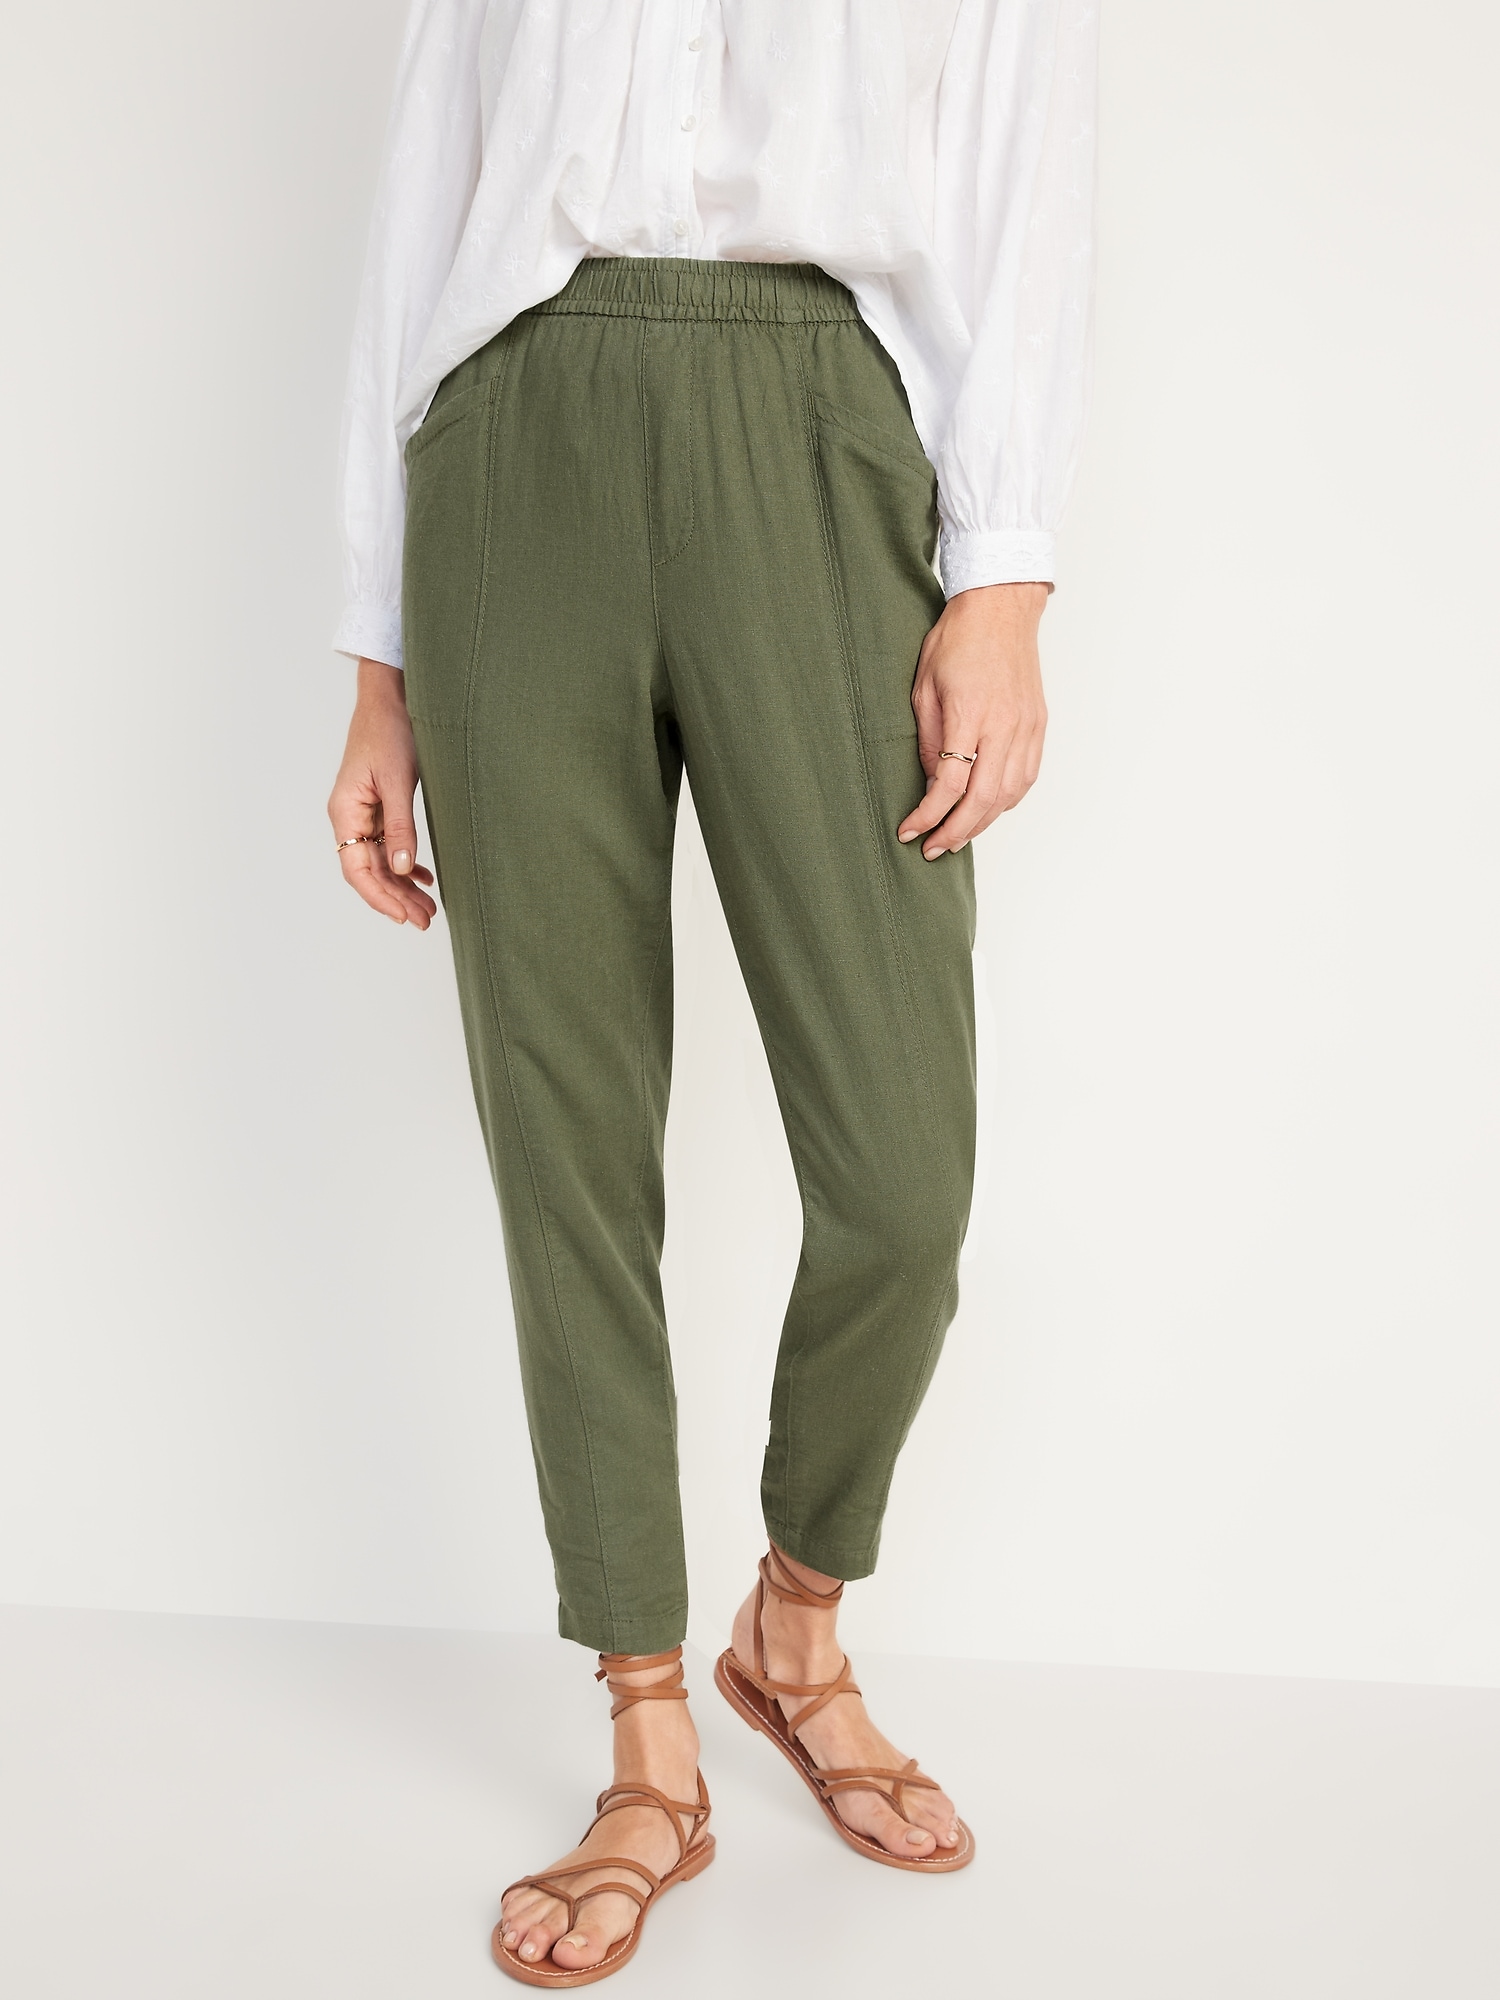 Old Navy Women's High-Waisted Cropped Linen Pants Mollusk Muted